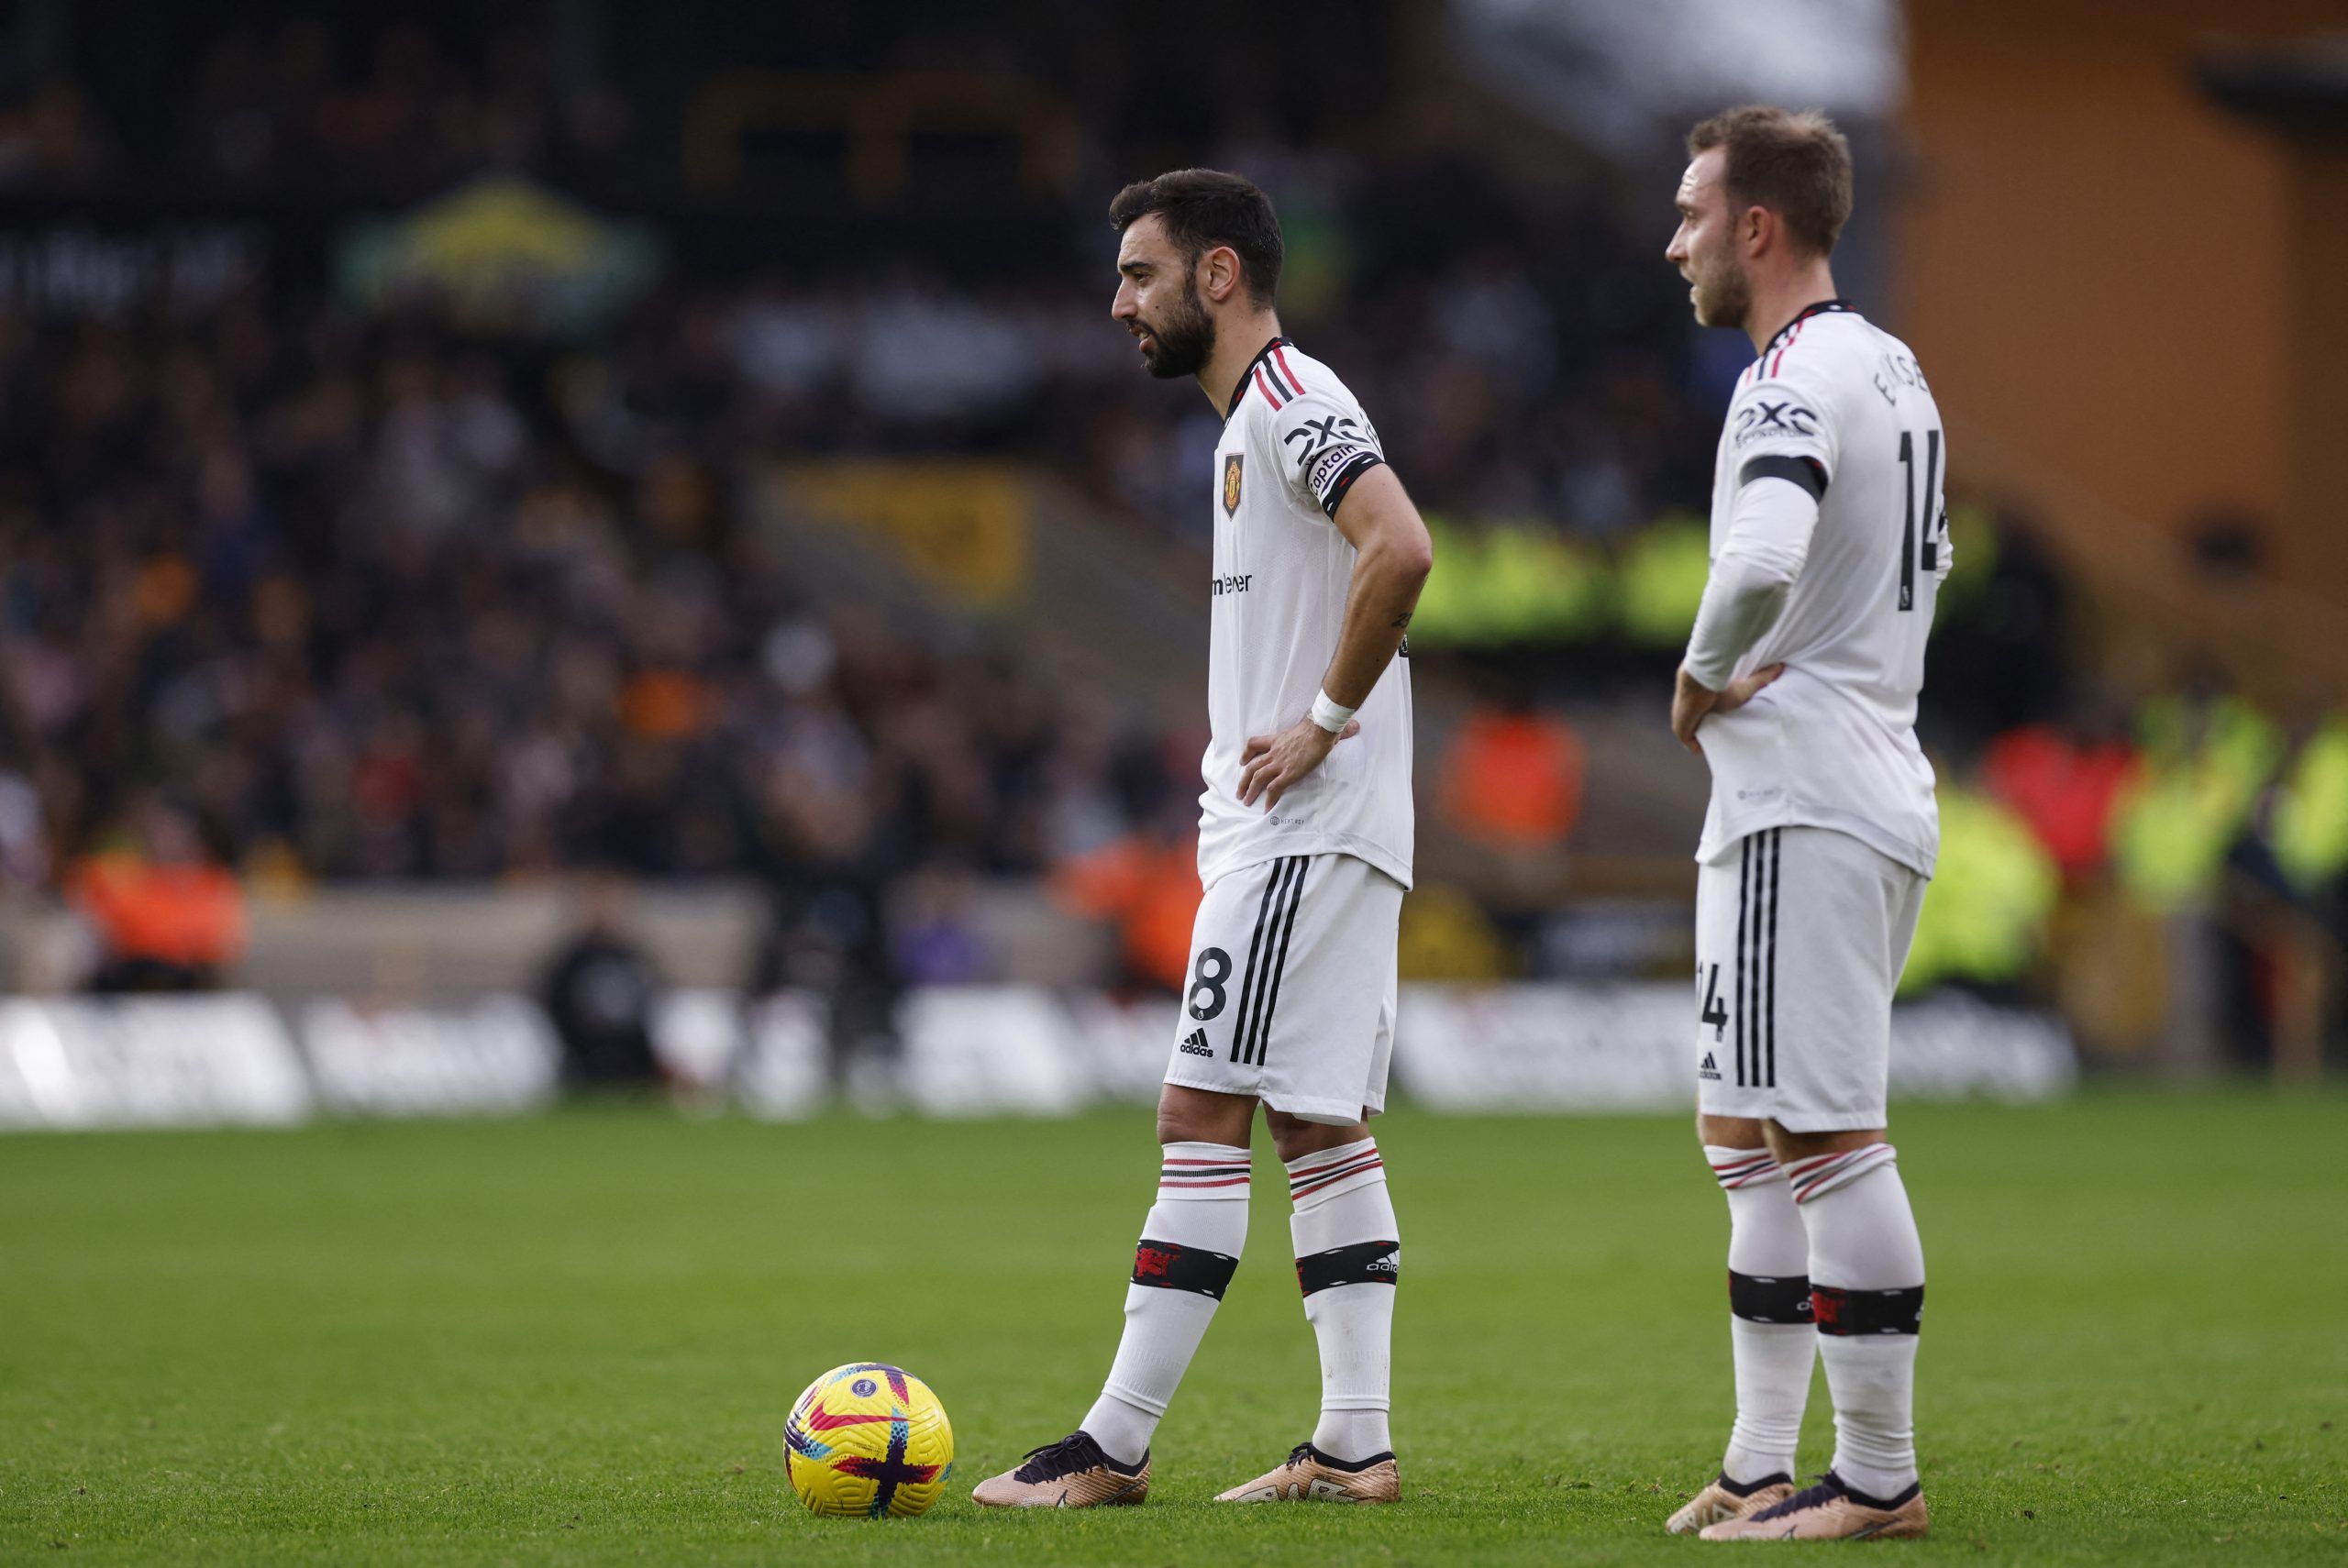 Soccer Football - Premier League - Wolverhampton Wanderers v Manchester United - Molineux Stadium, Wolverhampton, Britain - December 31, 2022 Manchester United's Bruno Fernandes waits to take a free kick as Christian Eriksen looks on Action Images via Reuters/Andrew Couldridge EDITORIAL USE ONLY. No use with unauthorized audio, video, data, fixture lists, club/league logos or 'live' services. Online in-match use limited to 75 images, no video emulation. No use in betting, games or single club /l